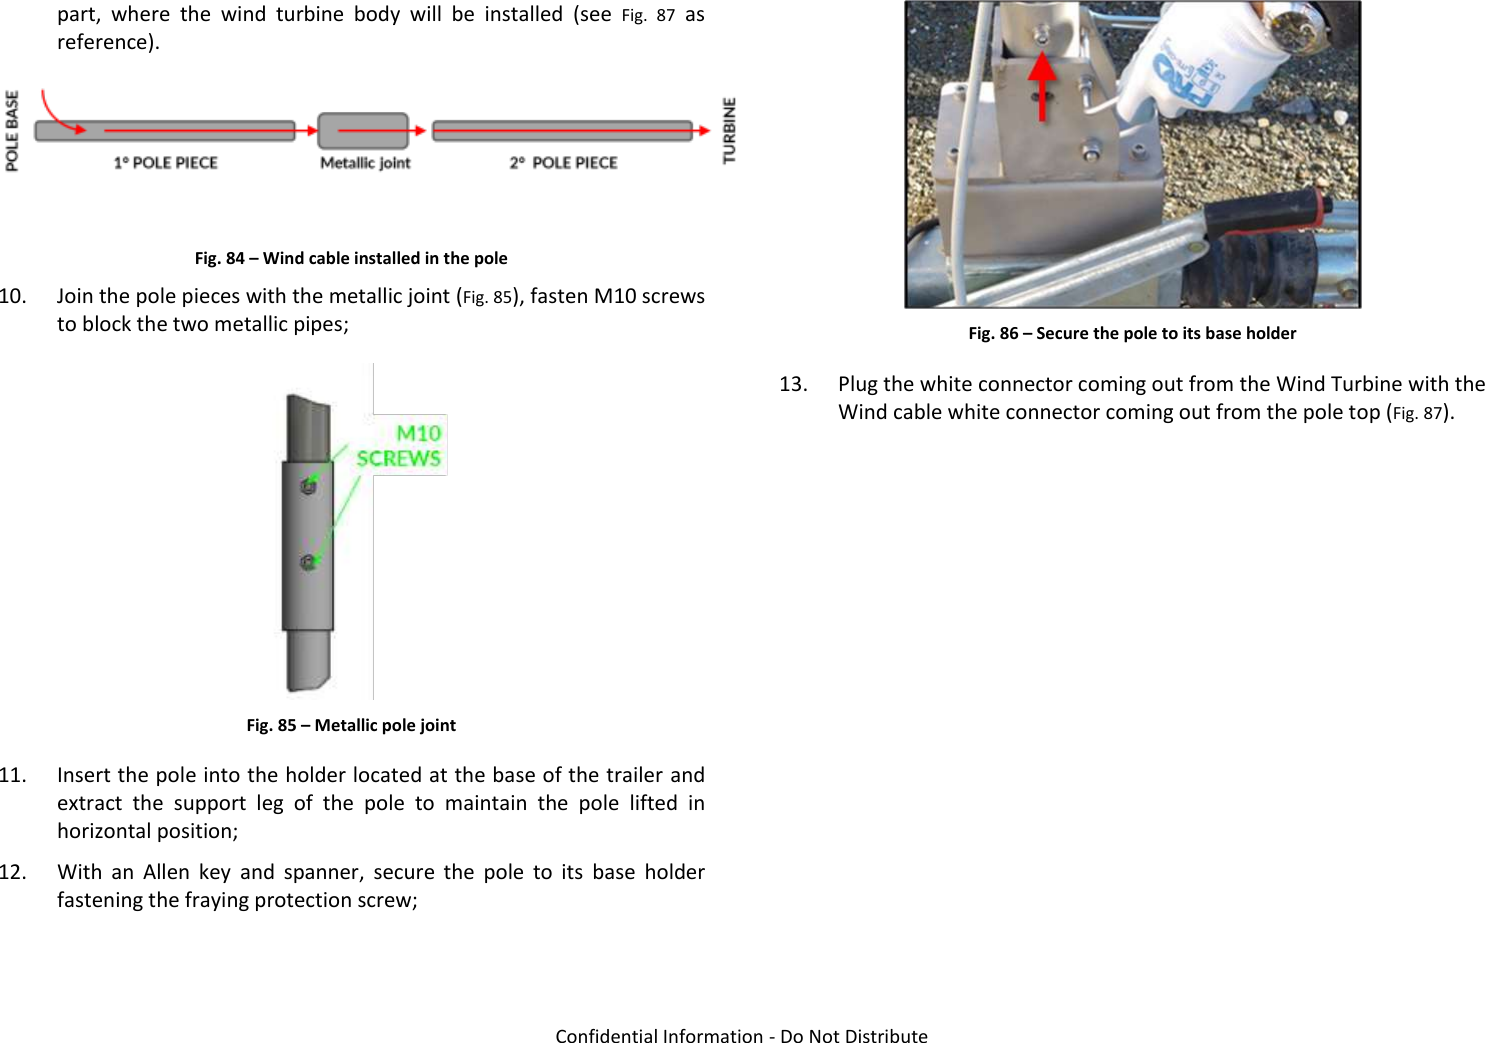   Confidential Information - Do Not Distribute part,  where  the  wind  turbine  body  will  be  installed  (see  Fig.  87  as reference).   Fig. 84 – Wind cable installed in the pole 10. Join the pole pieces with the metallic joint (Fig. 85), fasten M10 screws to block the two metallic pipes;  Fig. 85 – Metallic pole joint 11. Insert the pole into the holder located at the base of the trailer and extract  the  support  leg  of  the  pole  to  maintain  the  pole  lifted  in horizontal position; 12. With  an  Allen  key  and  spanner,  secure  the  pole  to  its  base  holder fastening the fraying protection screw;  Fig. 86 – Secure the pole to its base holder 13. Plug the white connector coming out from the Wind Turbine with the Wind cable white connector coming out from the pole top (Fig. 87).  